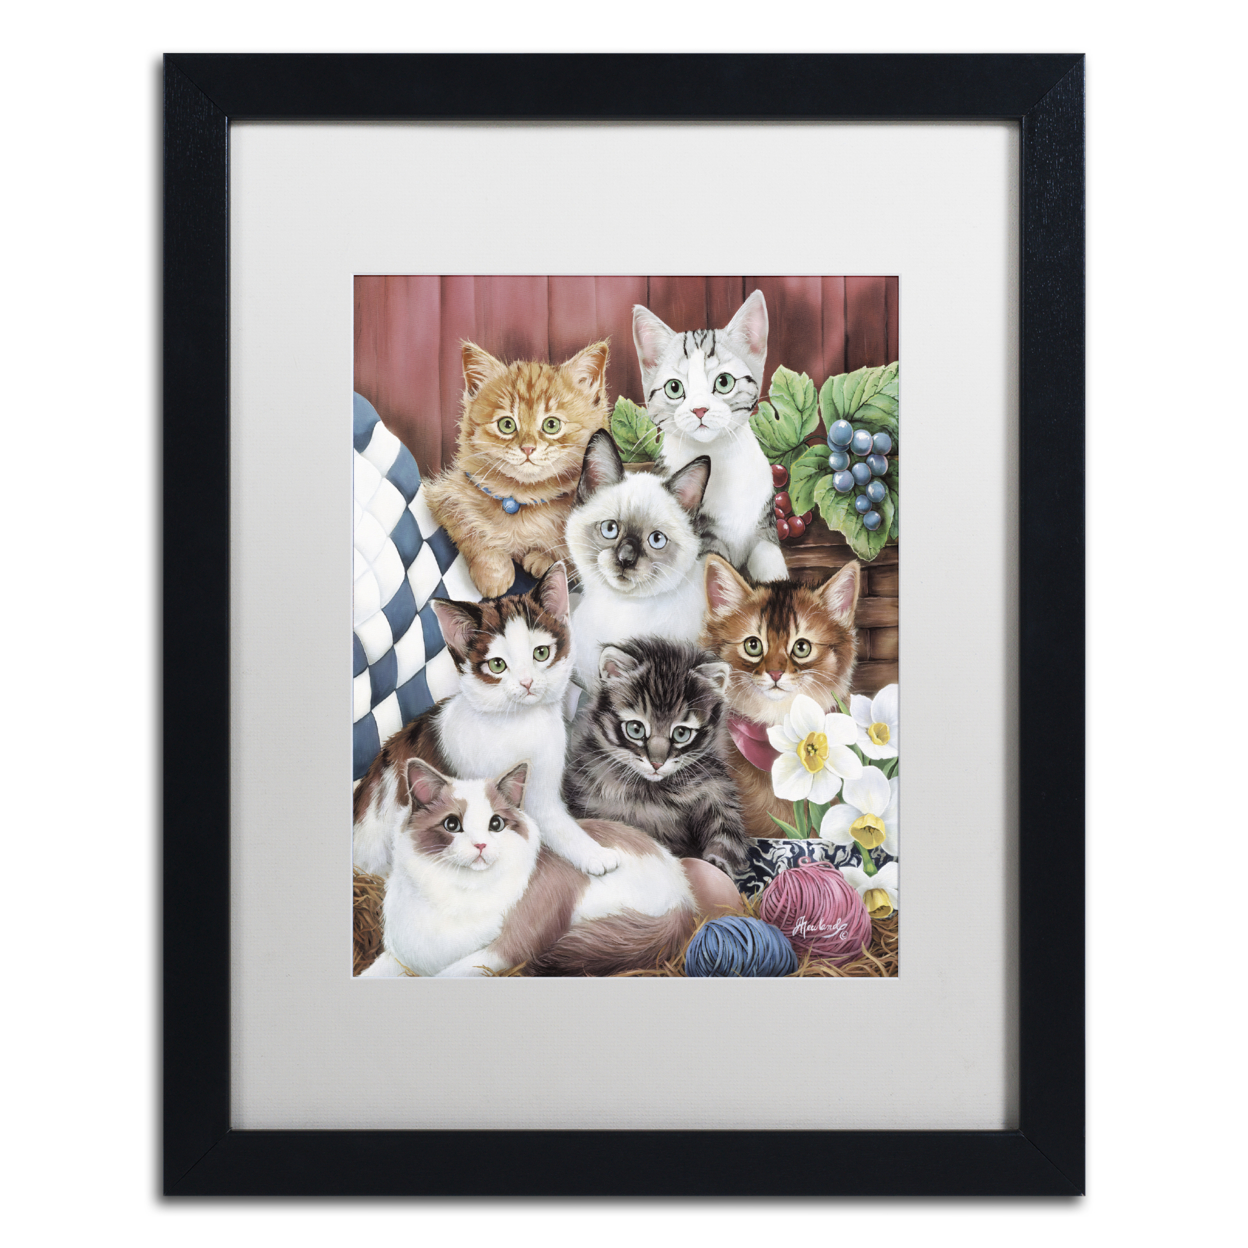 Jenny Newland 'Cuddly Kittens' Black Wooden Framed Art 18 X 22 Inches